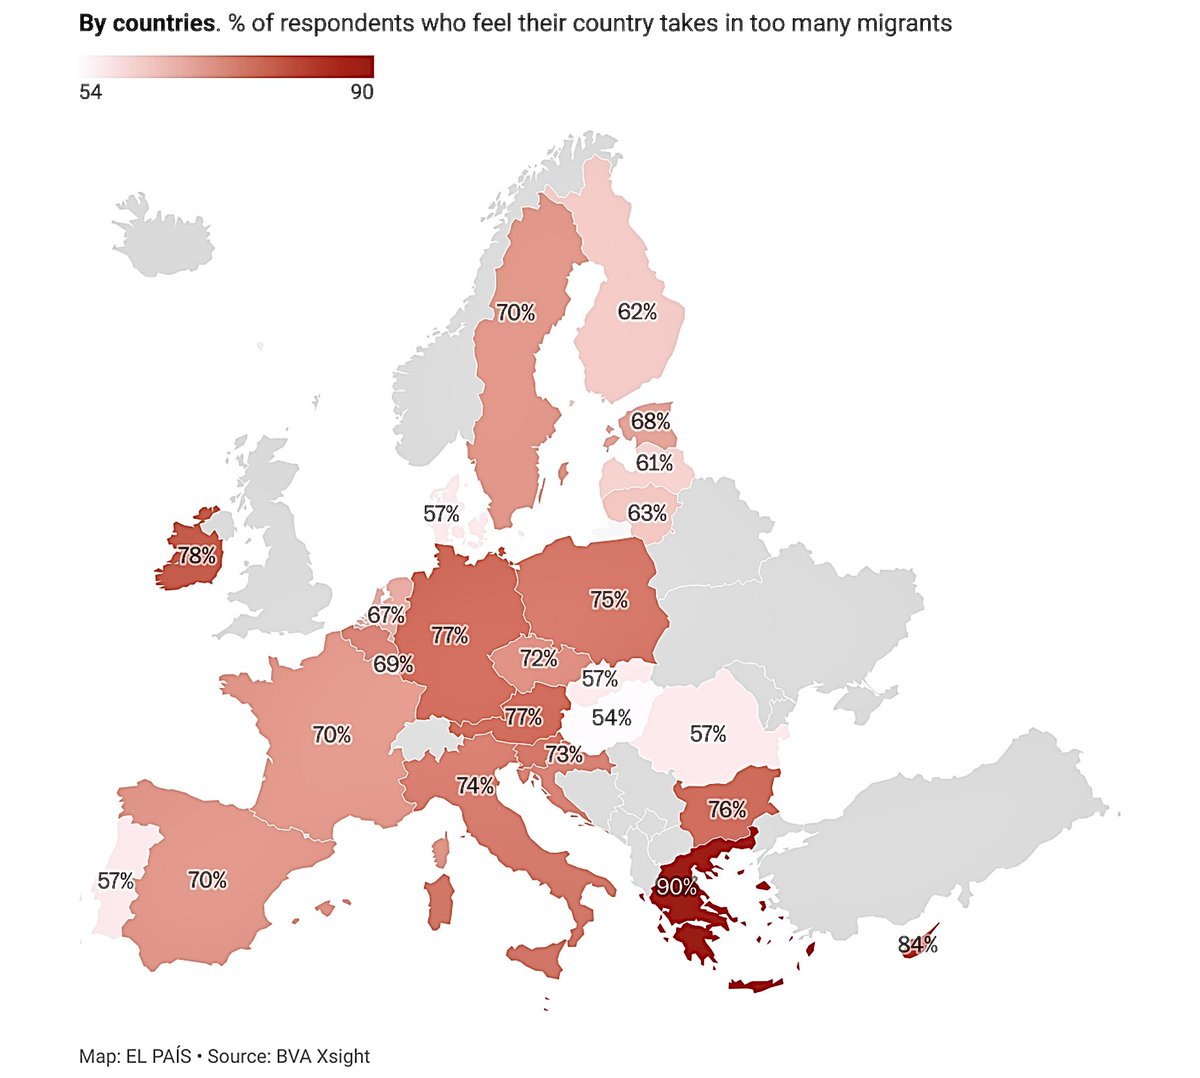 NEW SURVEY: 7 in 10 Europeans believe that their country is accepting too many migrants

Results broken down by country:

🇬🇷 Greece: 90% of citizens    
🇨🇾 Cyprus: 84% of citizens                      
🇮🇪 Ireland: 78% of citizens    
🇦🇹 Austria: 77% of citizens  
🇩🇪 Germany: 77%…